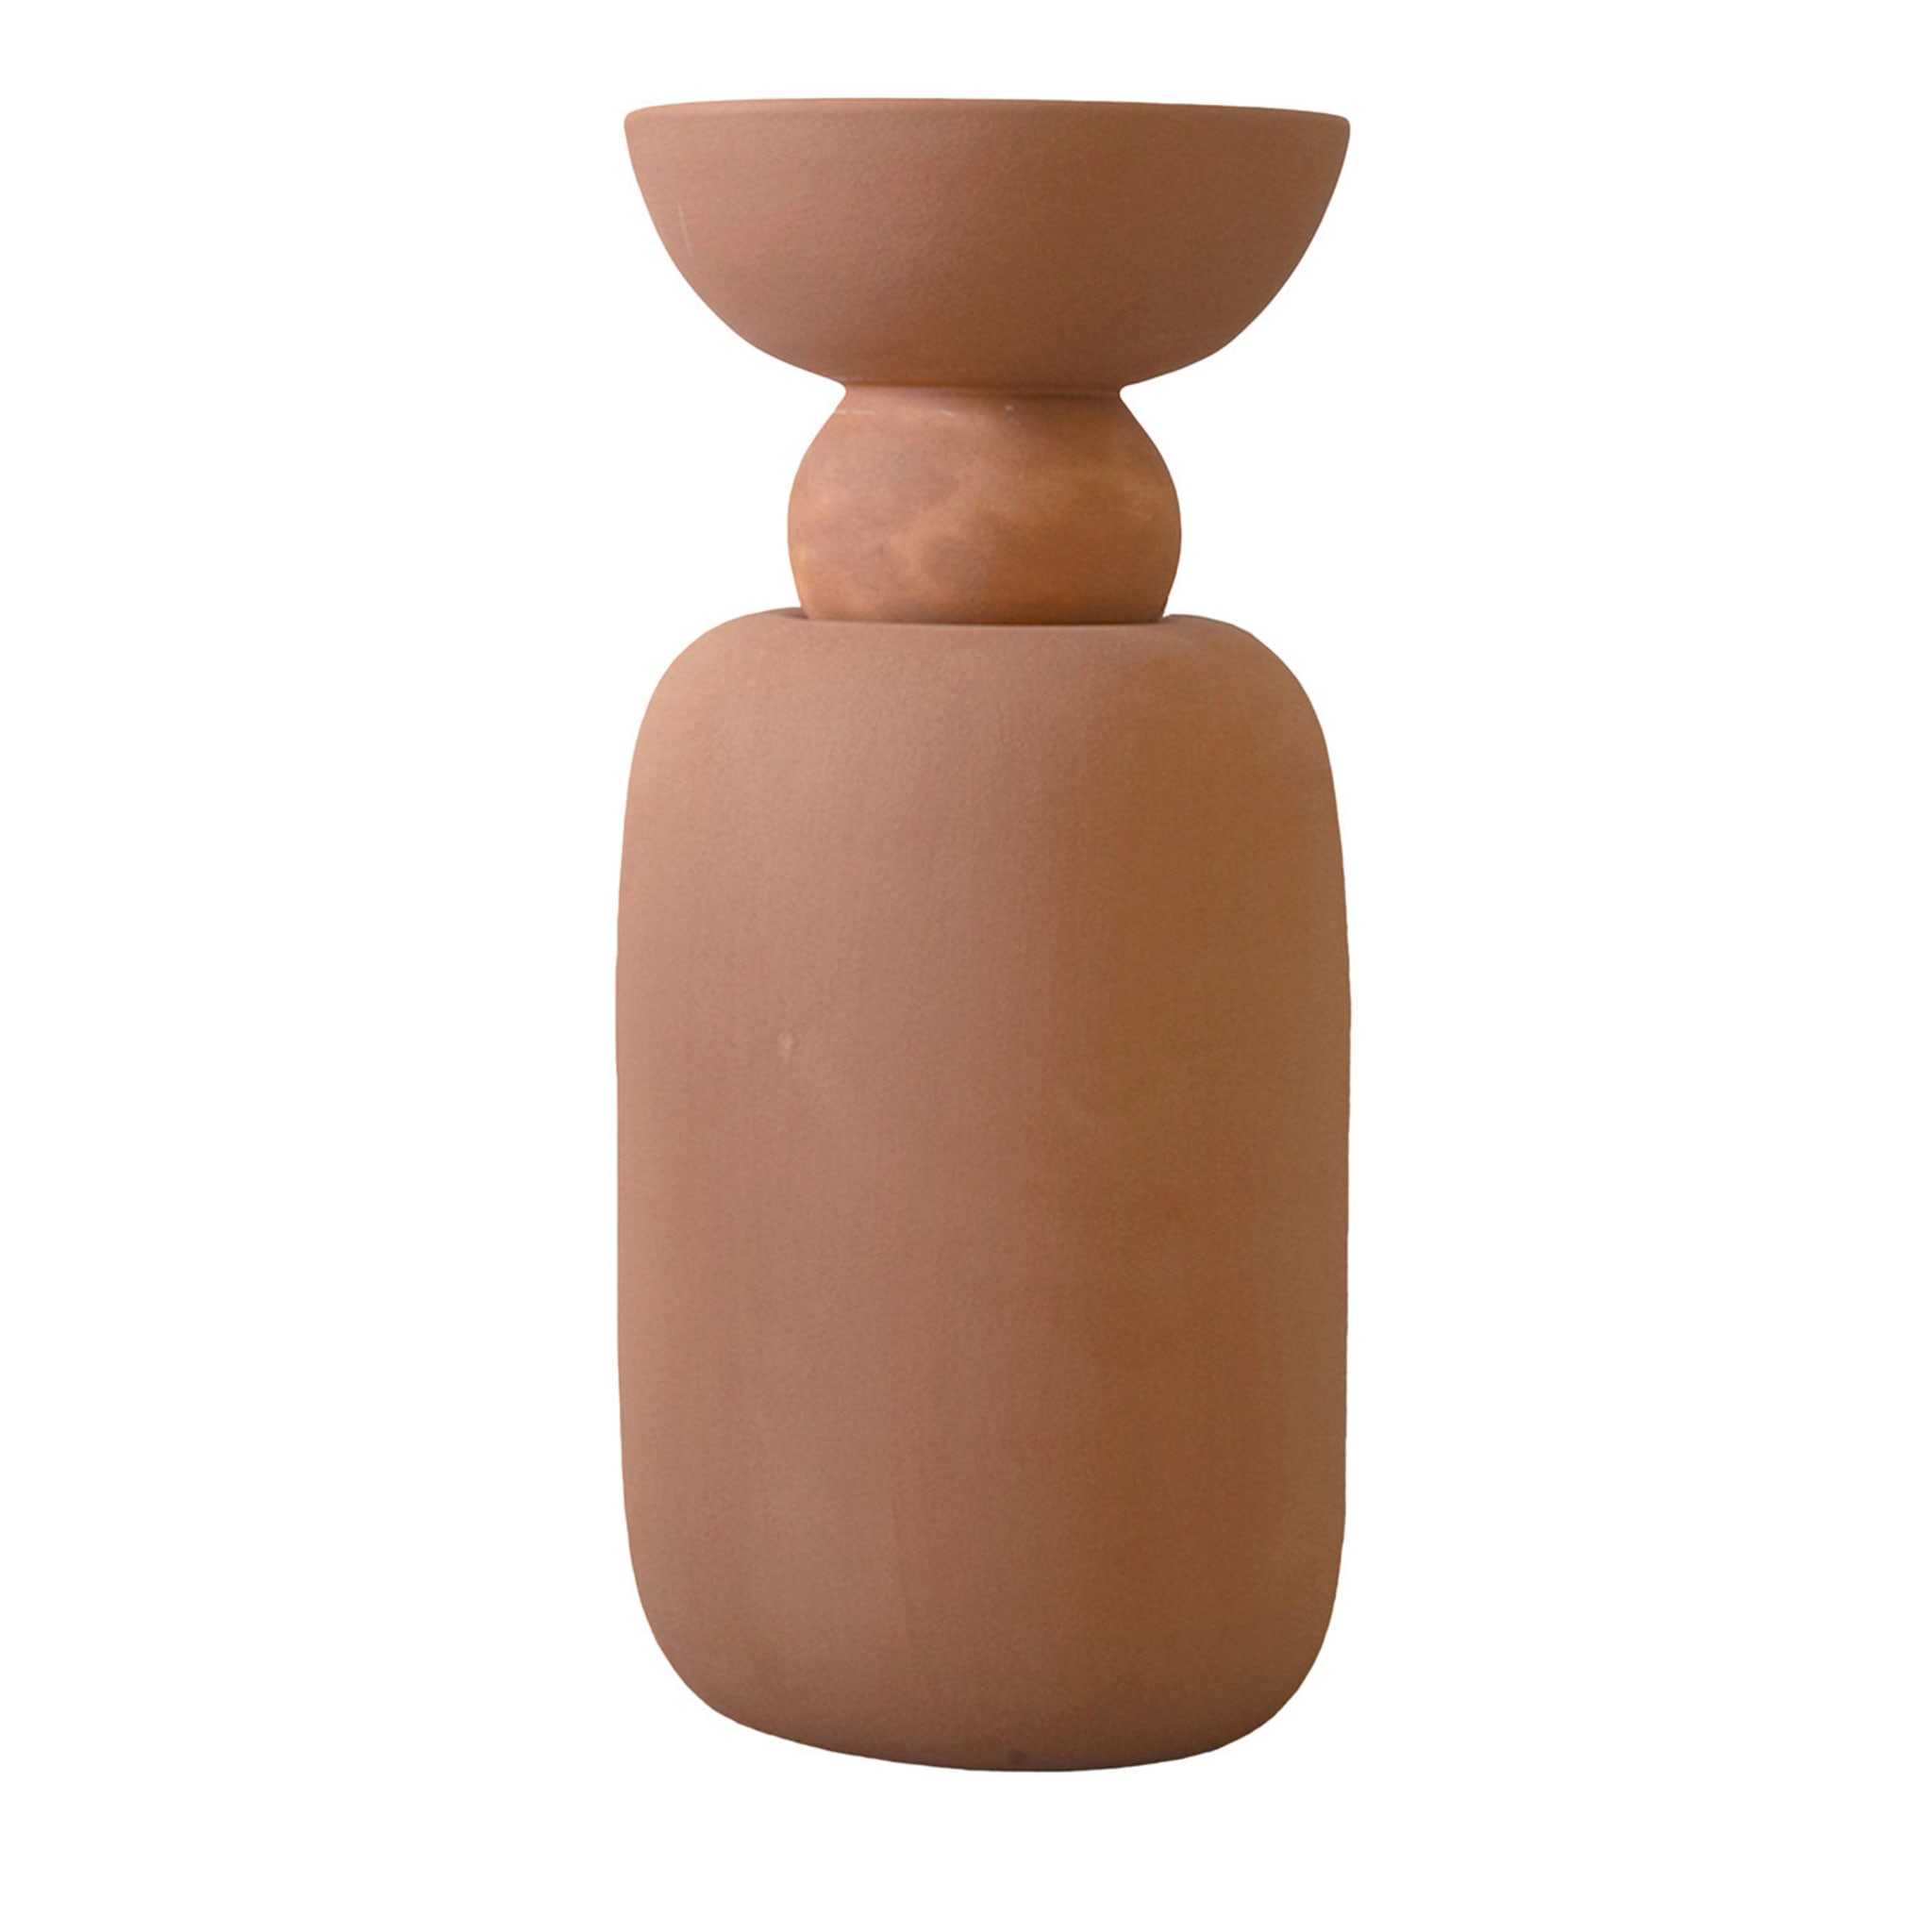 Botanica Terracotta Vase with Bowl Top - Main view